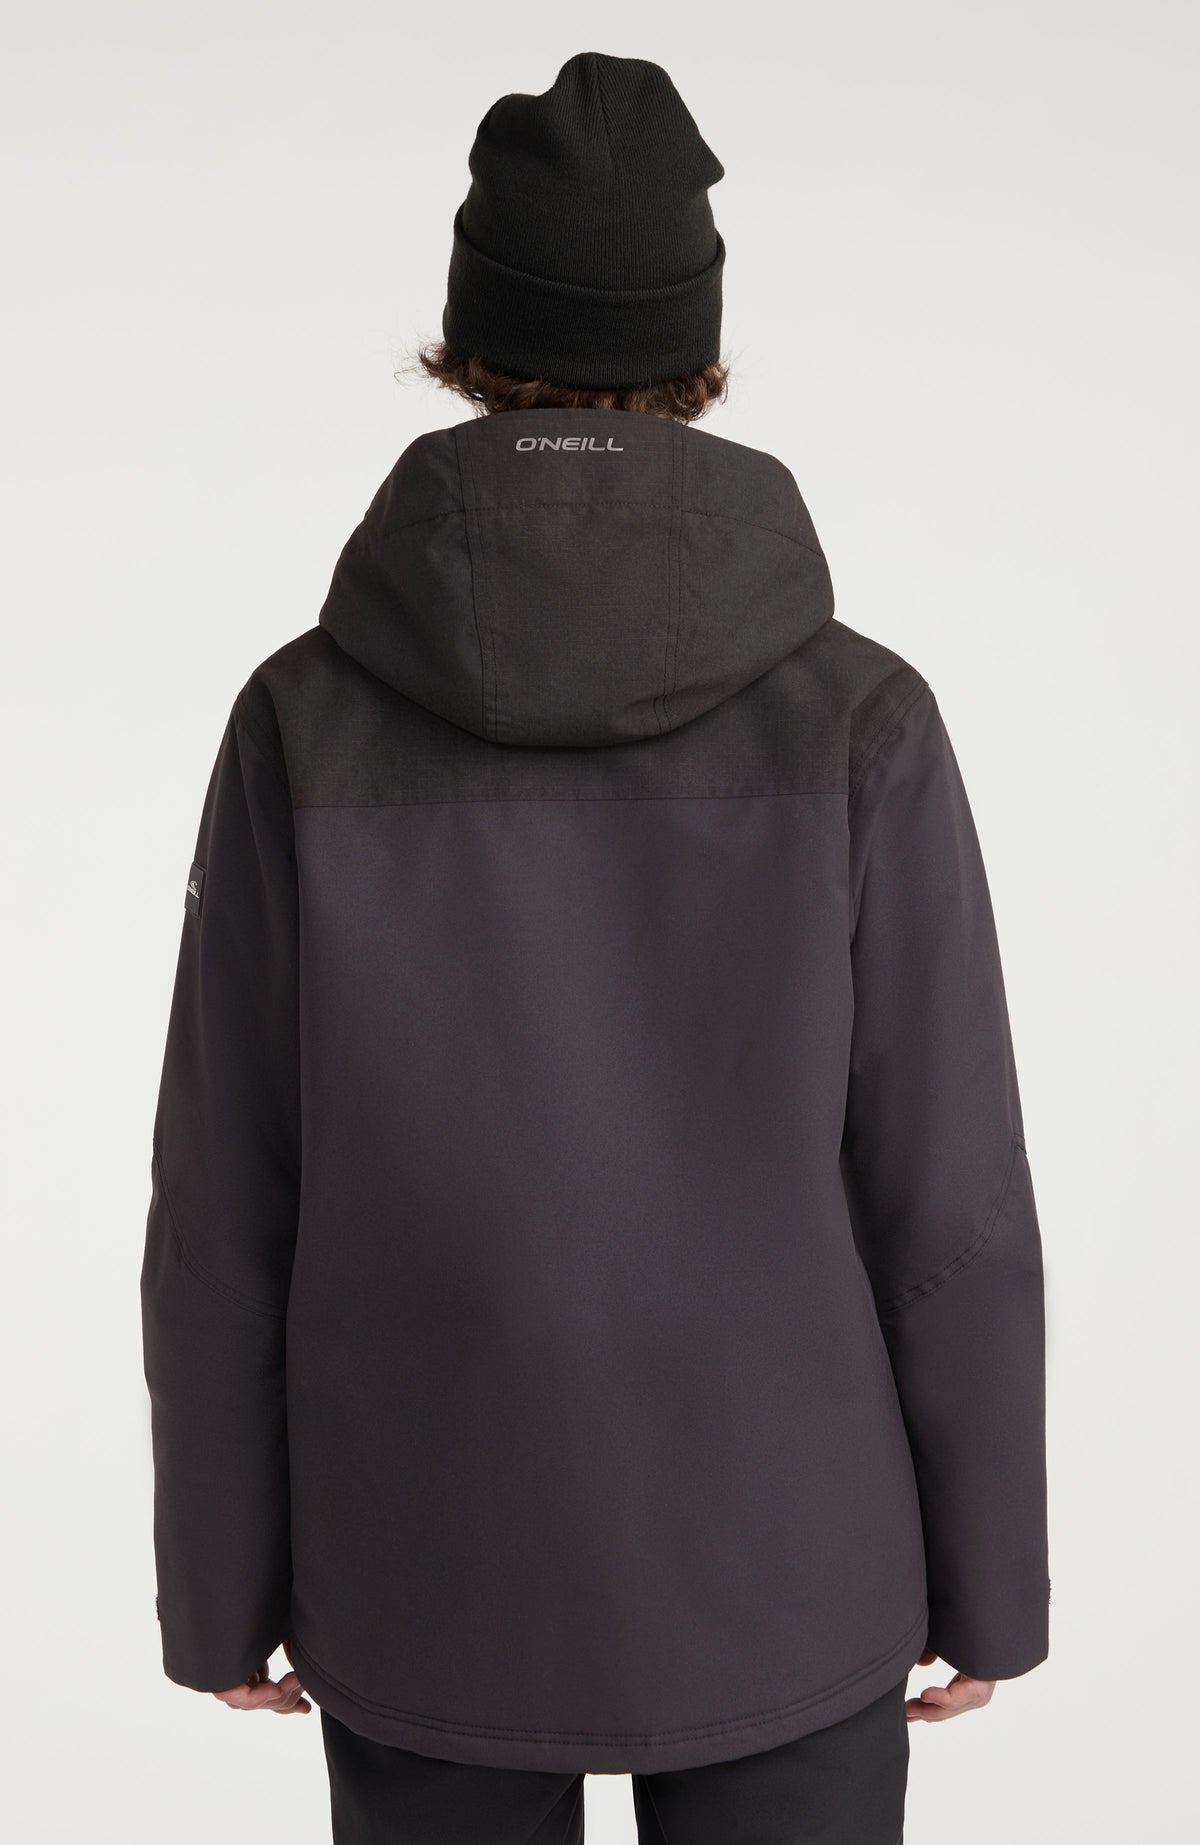 O'Neill Utility Jacket Black 8-16y - Clement